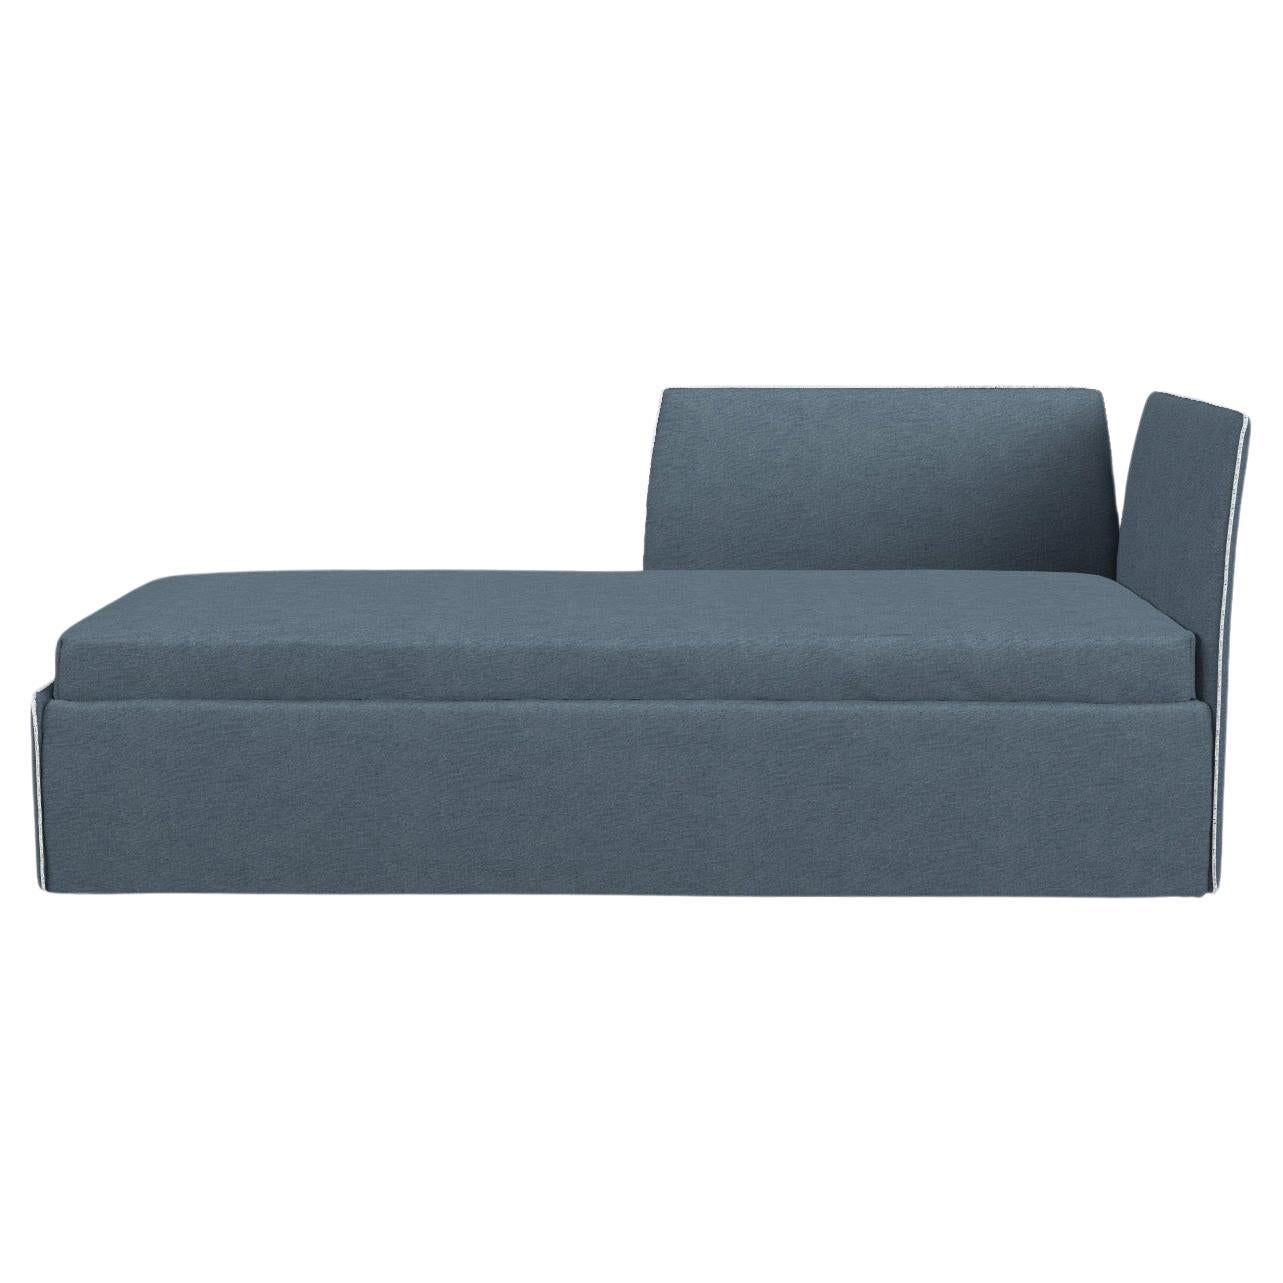 Gervasoni Open 3 Small Modular Bed Sofa in Munch Upholstery by Paola Navone For Sale